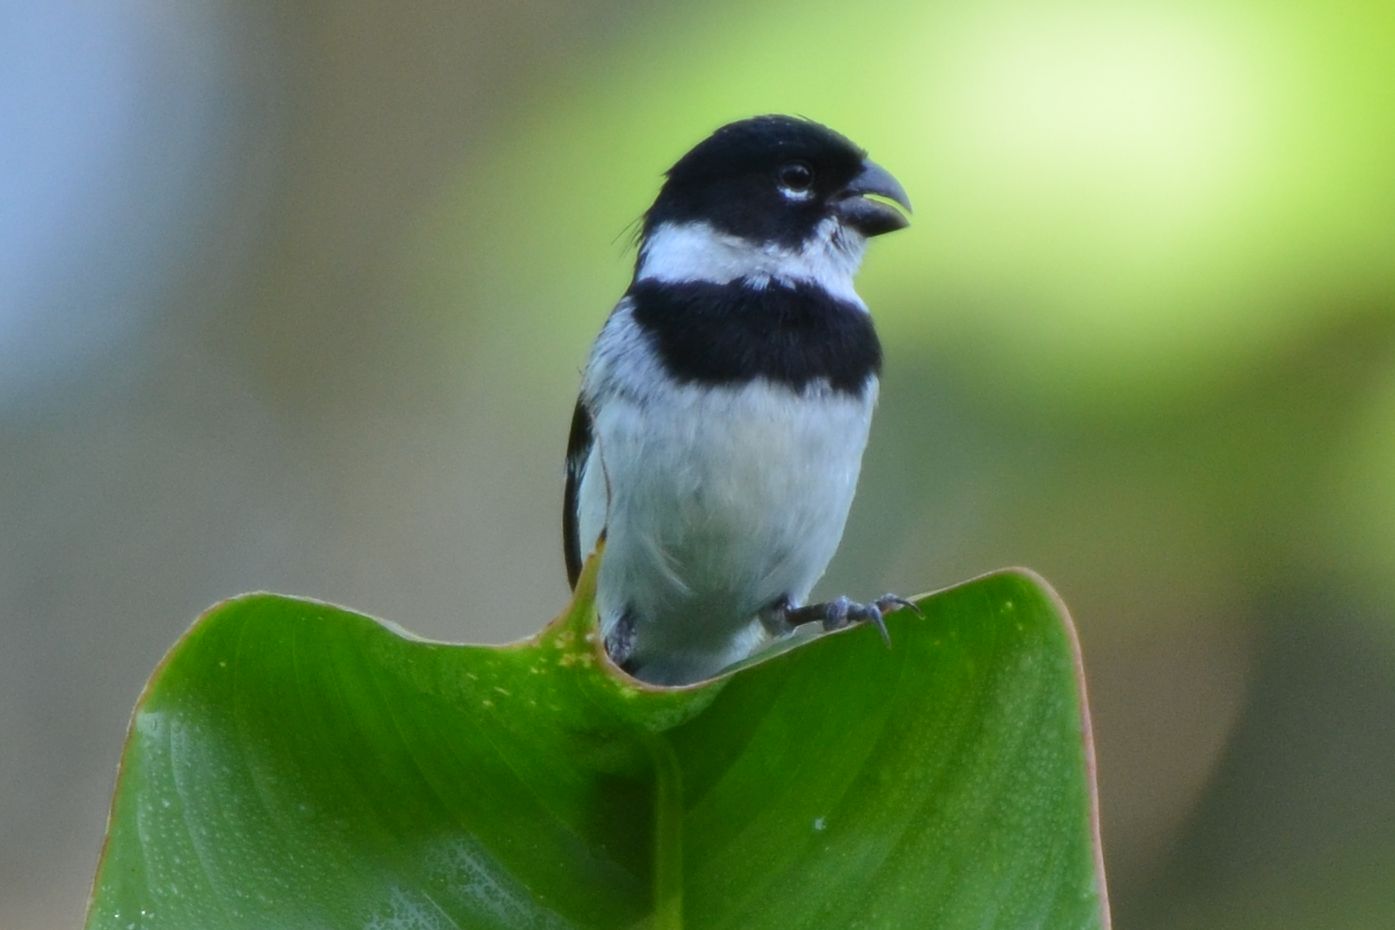 Click picture to see more White-collared Seedeaters.